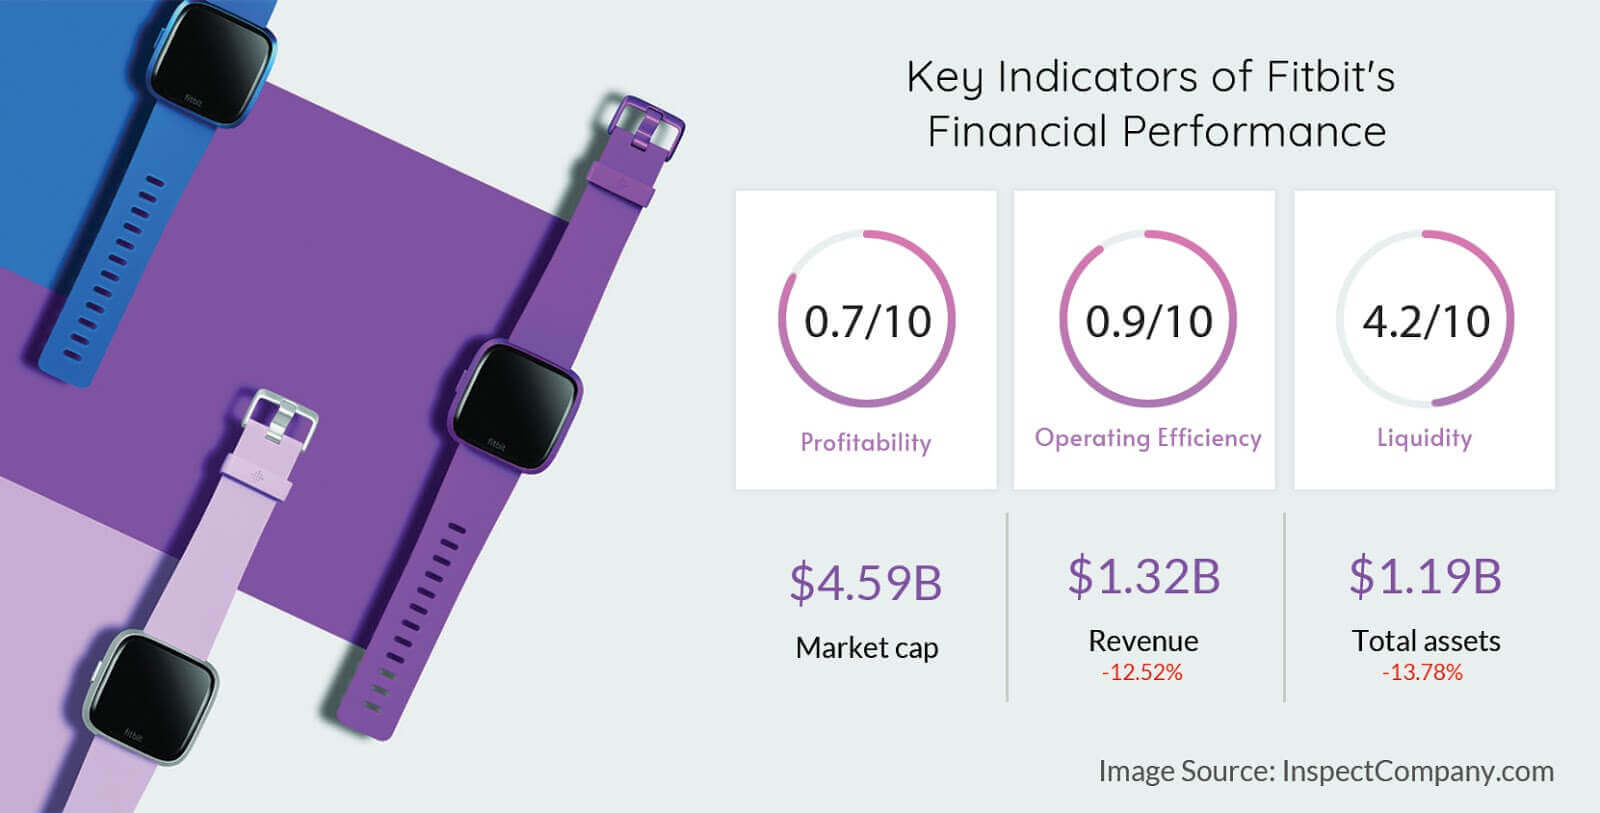 Financial performance of Fitbit